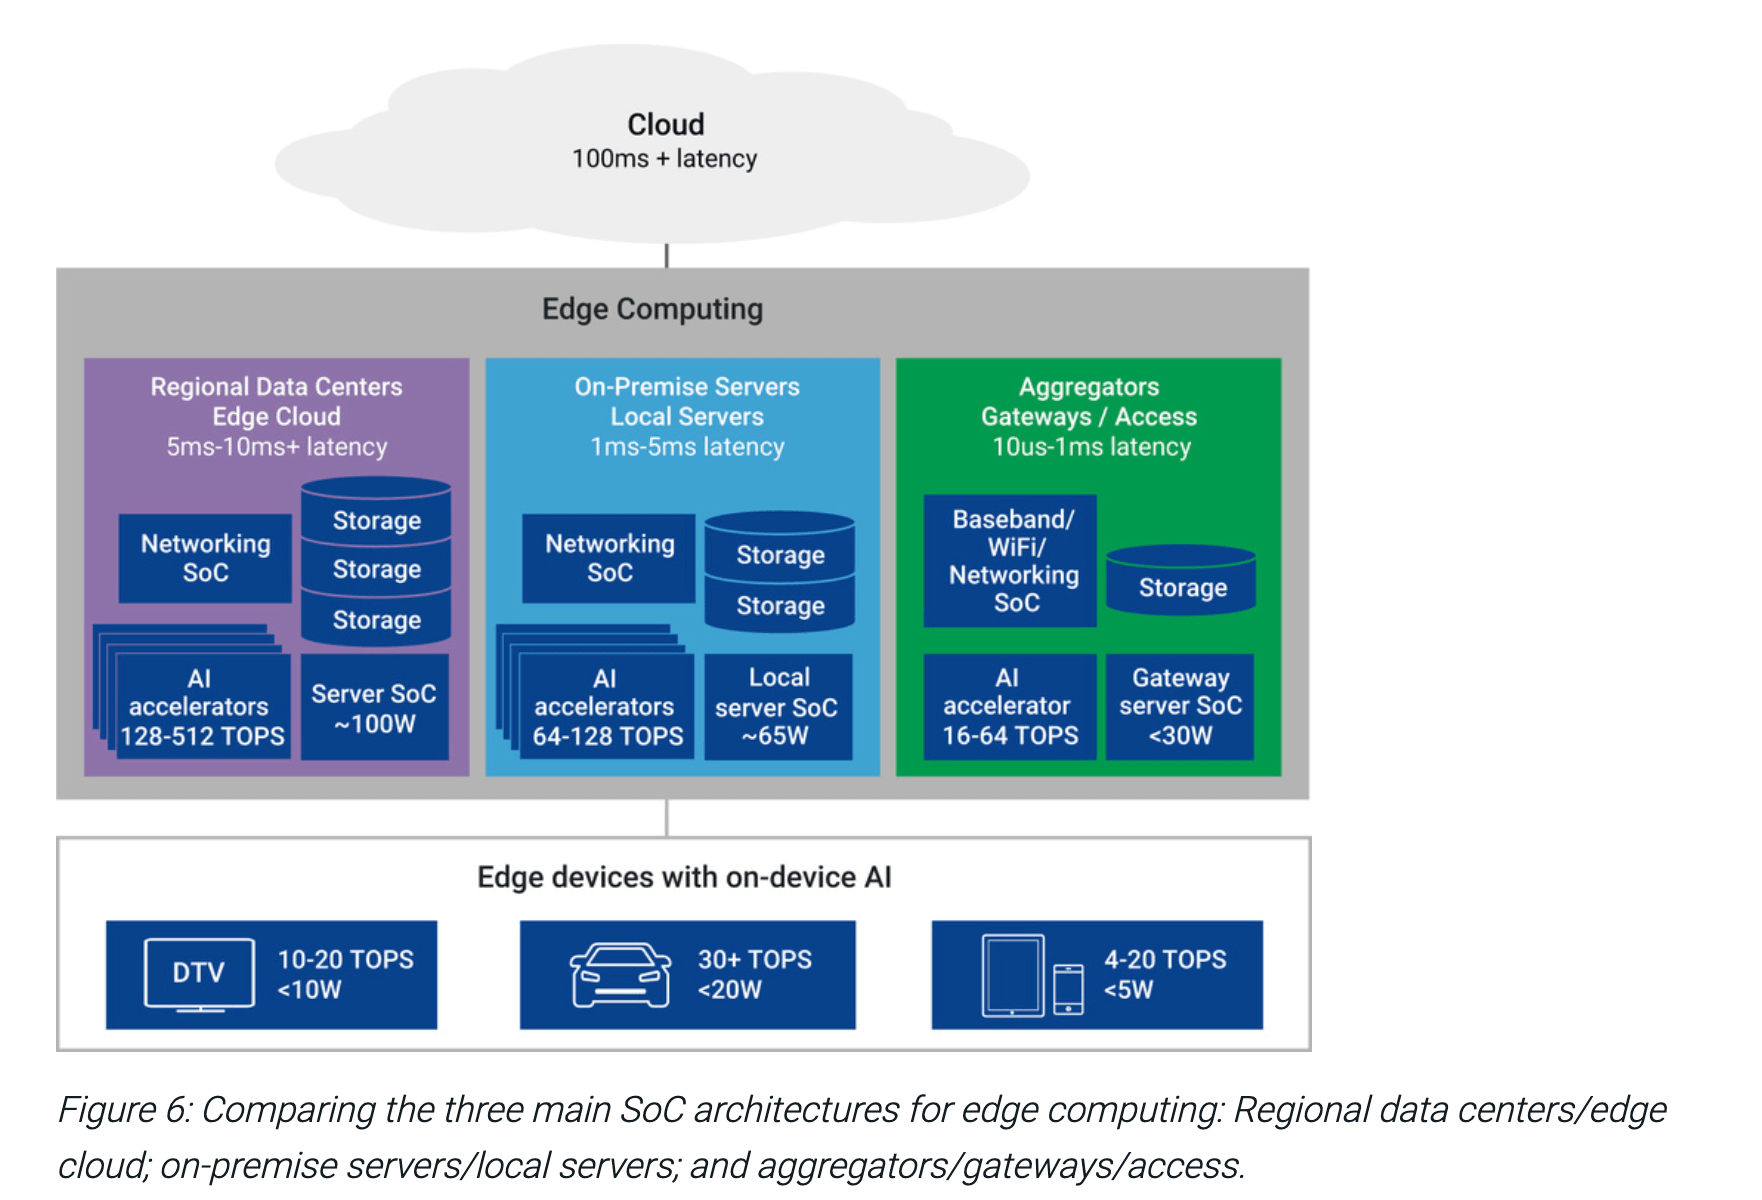 Architectures for Edge computing